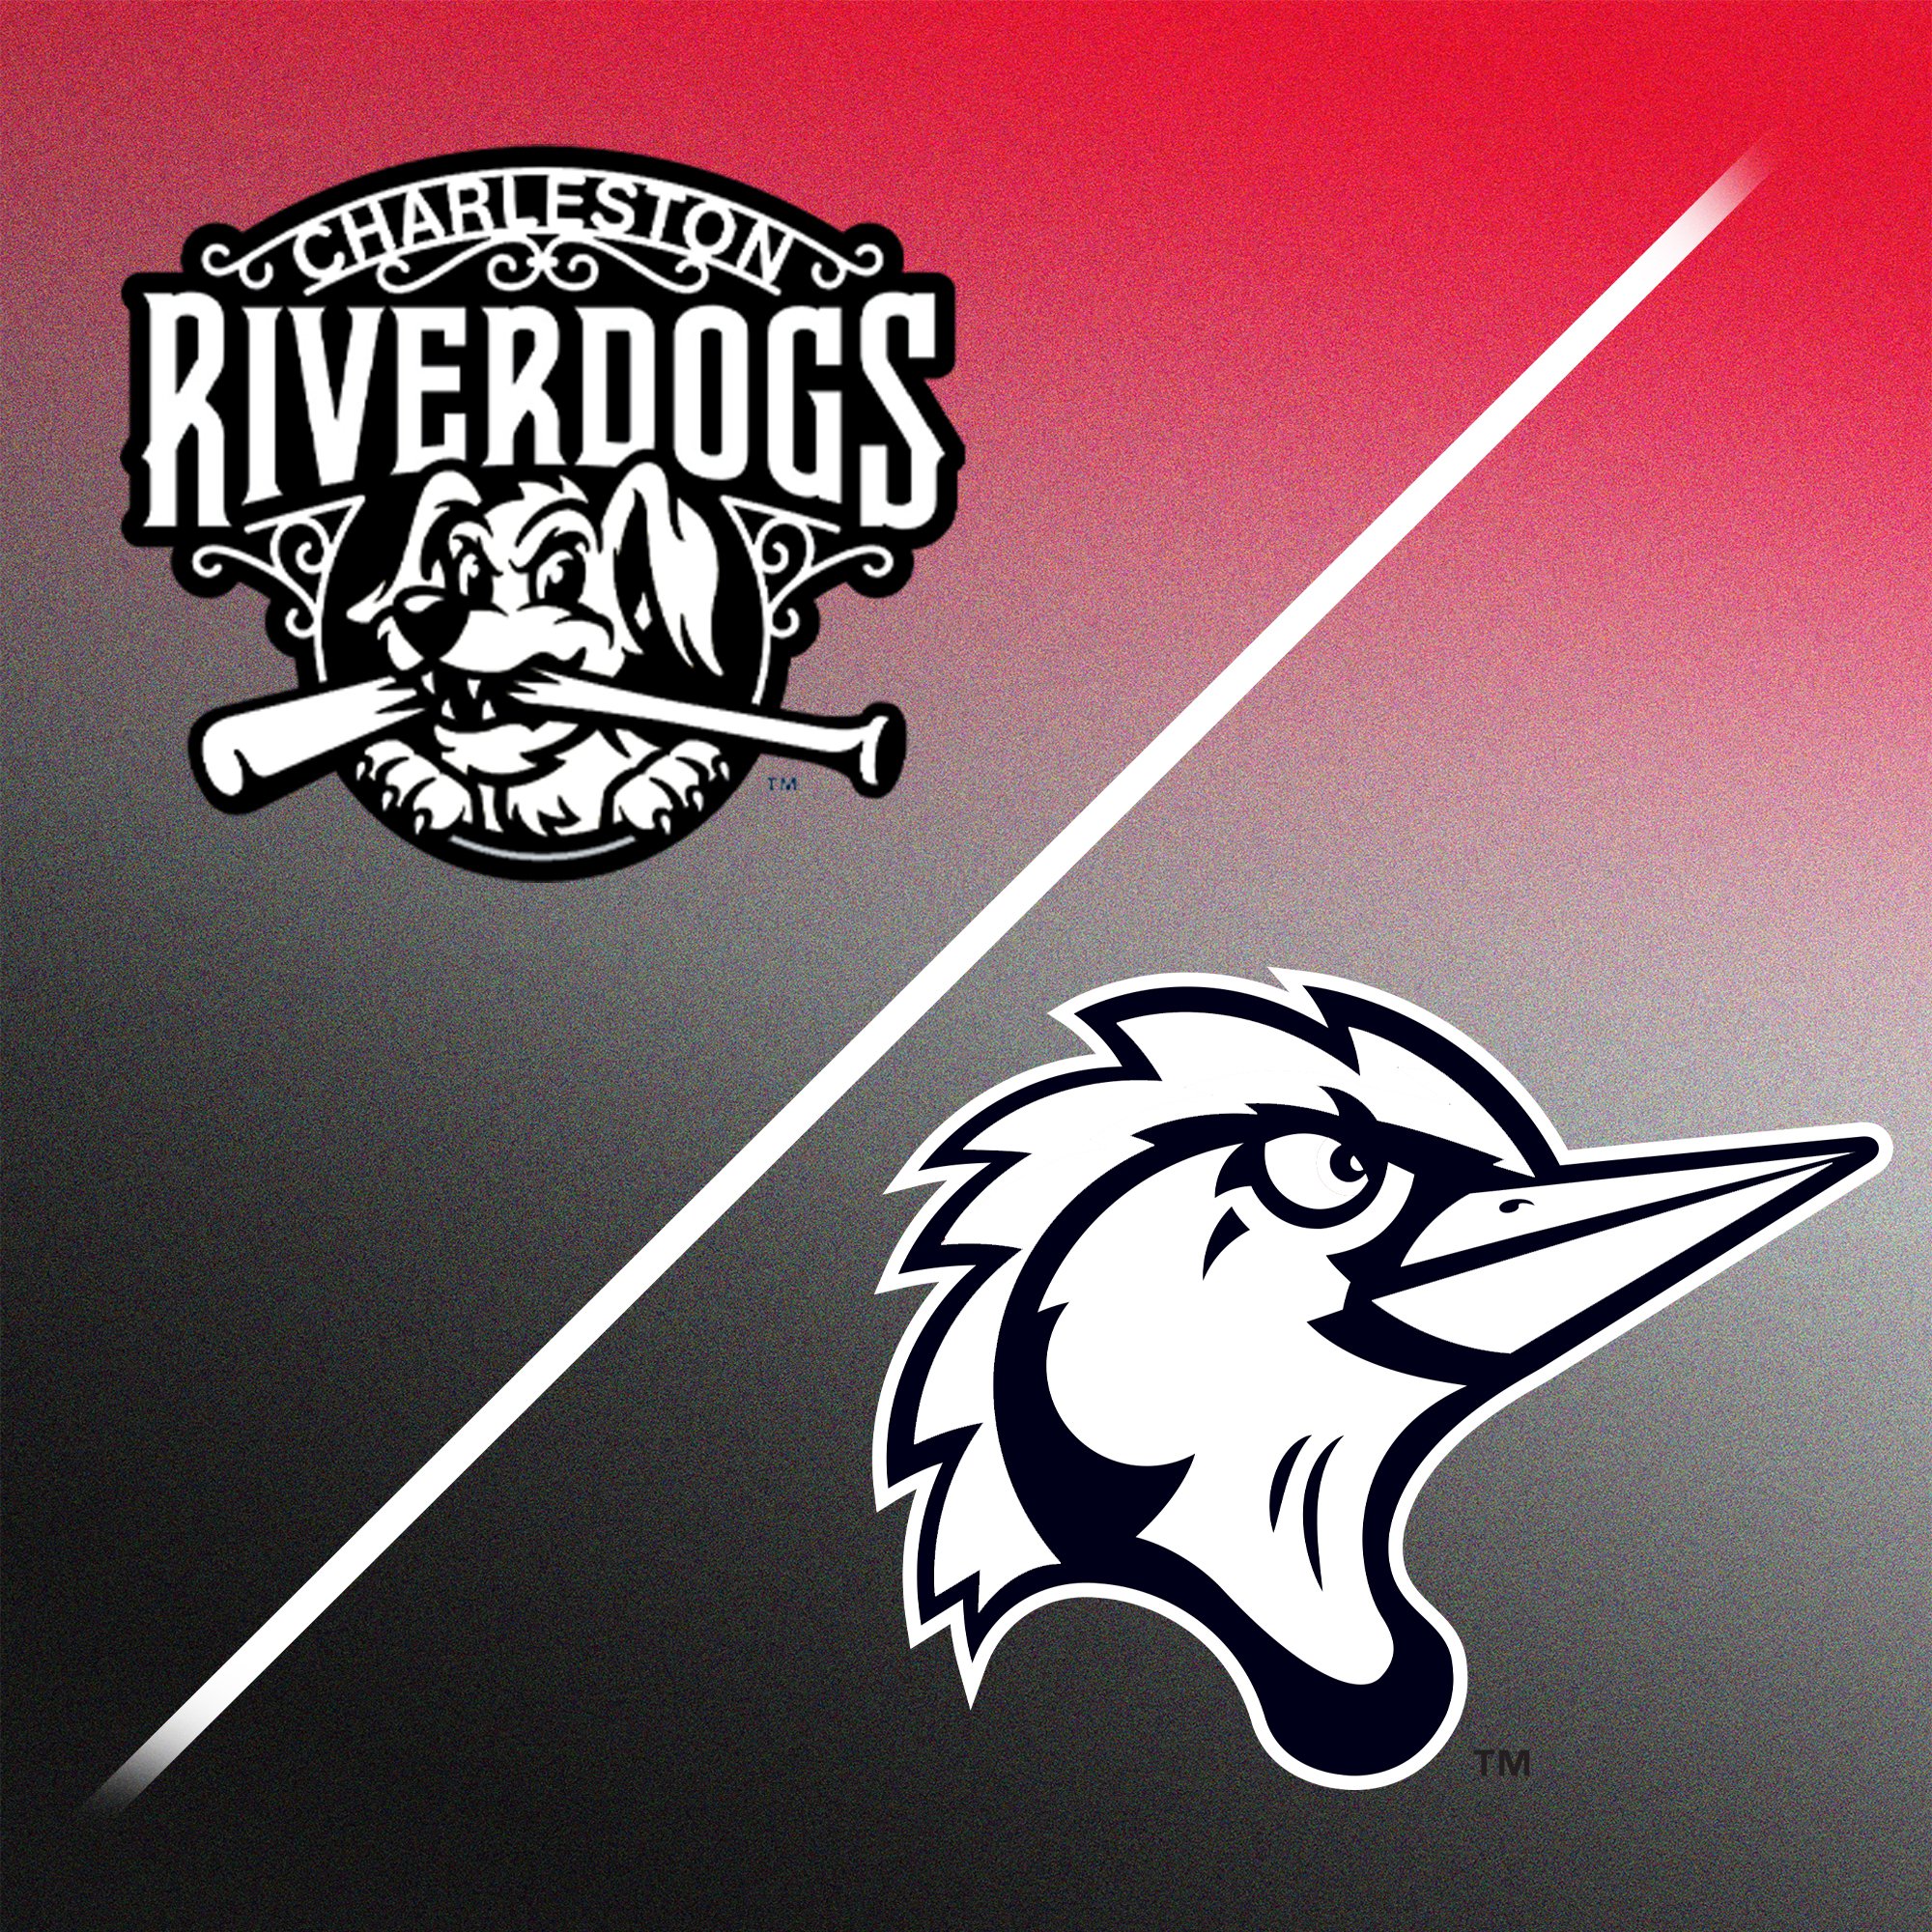 Military Appreciation Night with the River Dogs